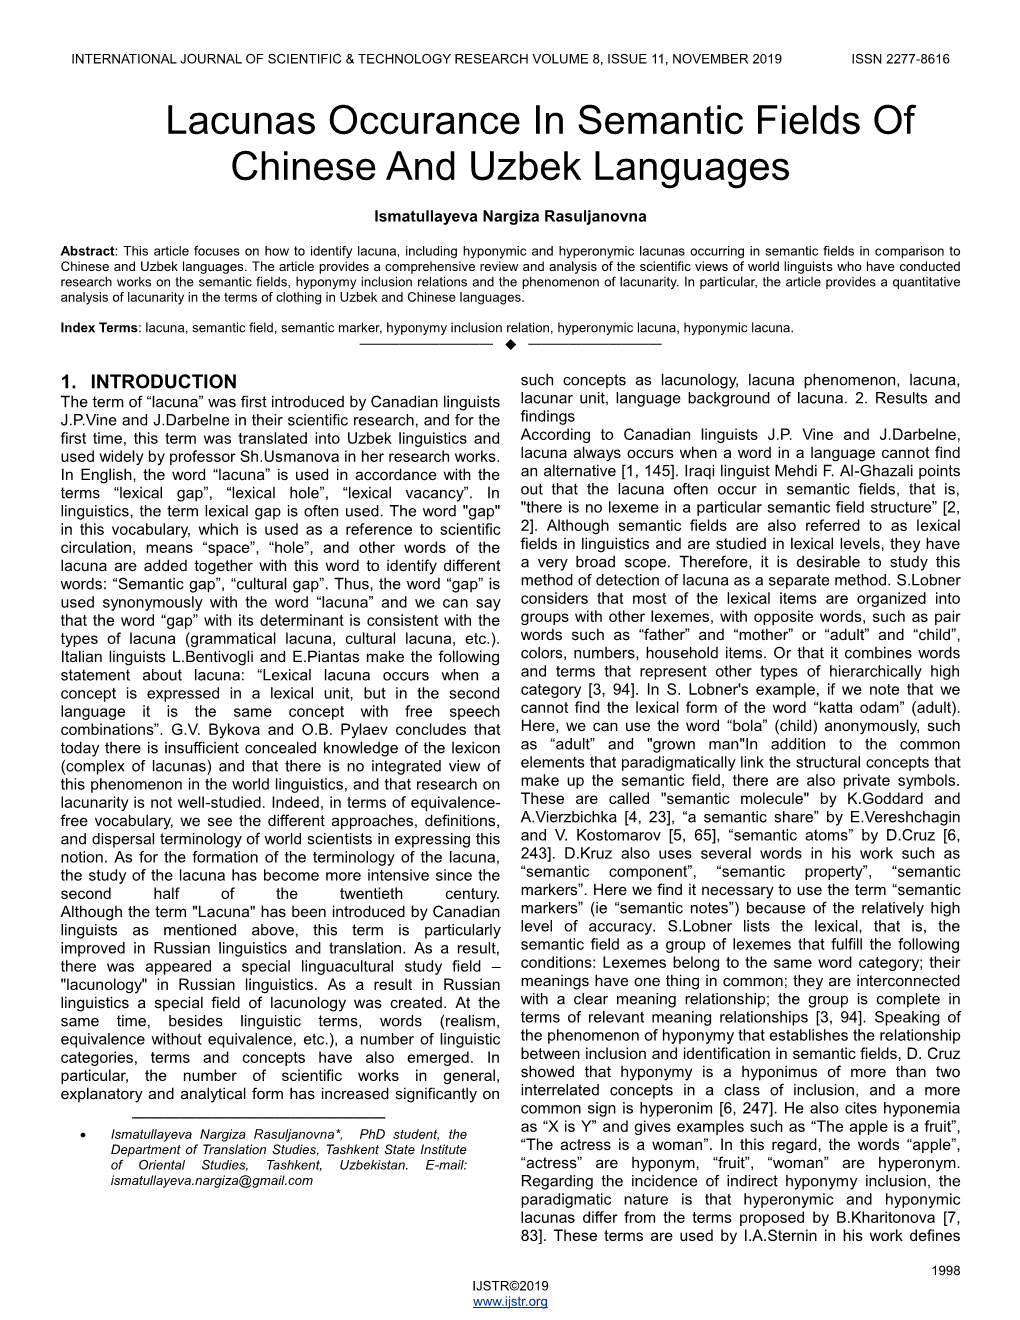 Lacunas Occurance in Semantic Fields of Chinese and Uzbek Languages